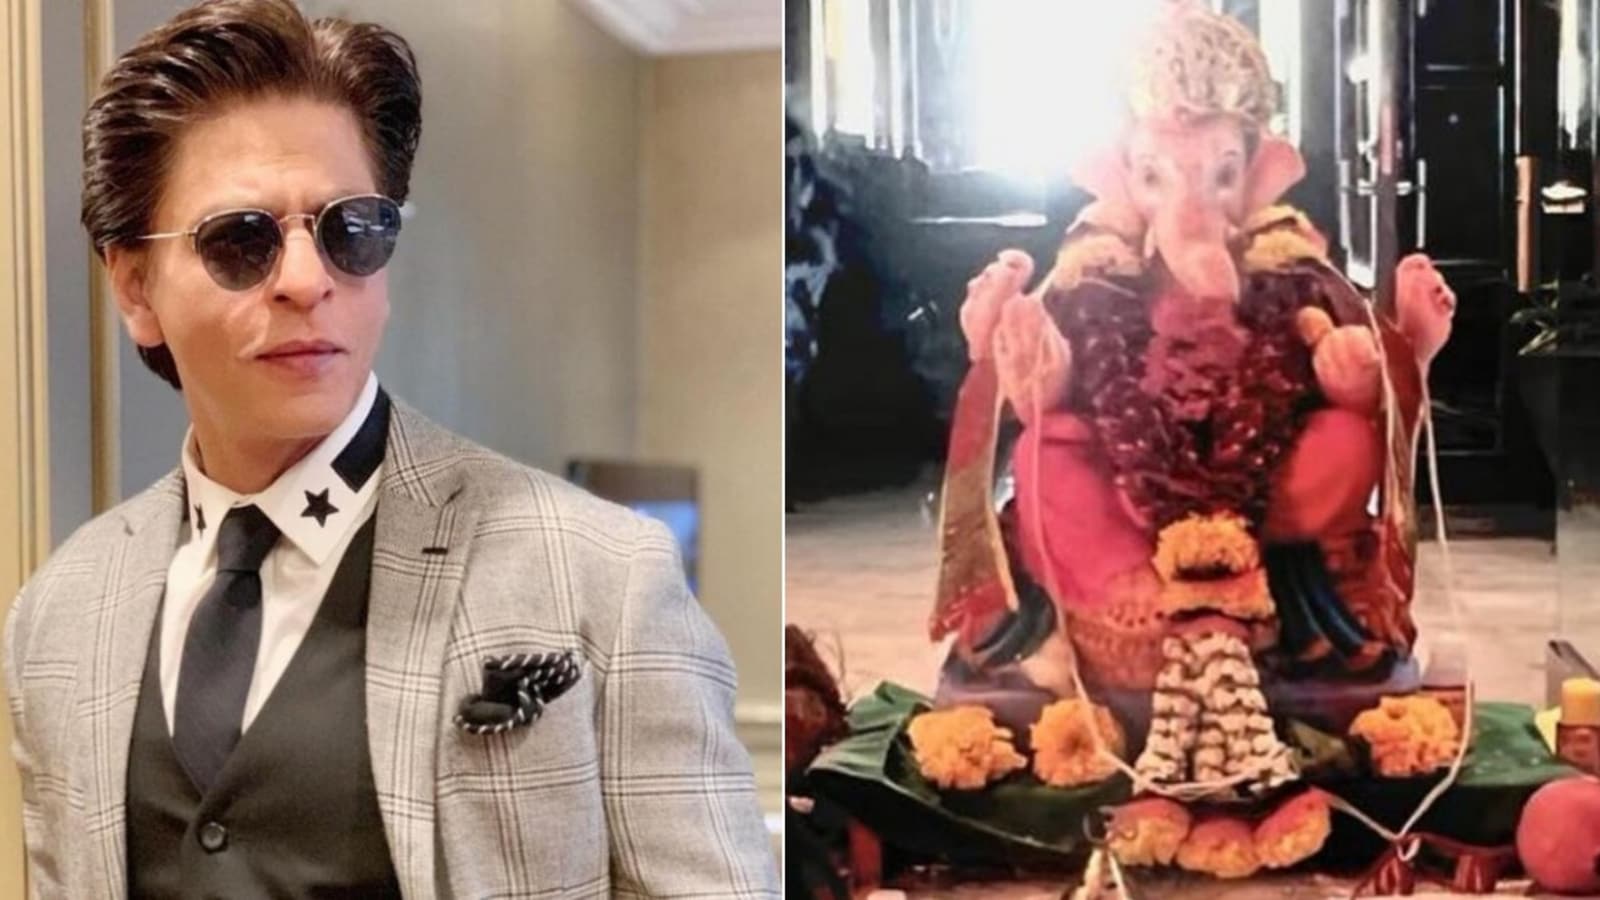 Shah Rukh Khan shares pic of Ganesh Chaturthi celebration with AbRam, says ‘modaks have been scrumptious’